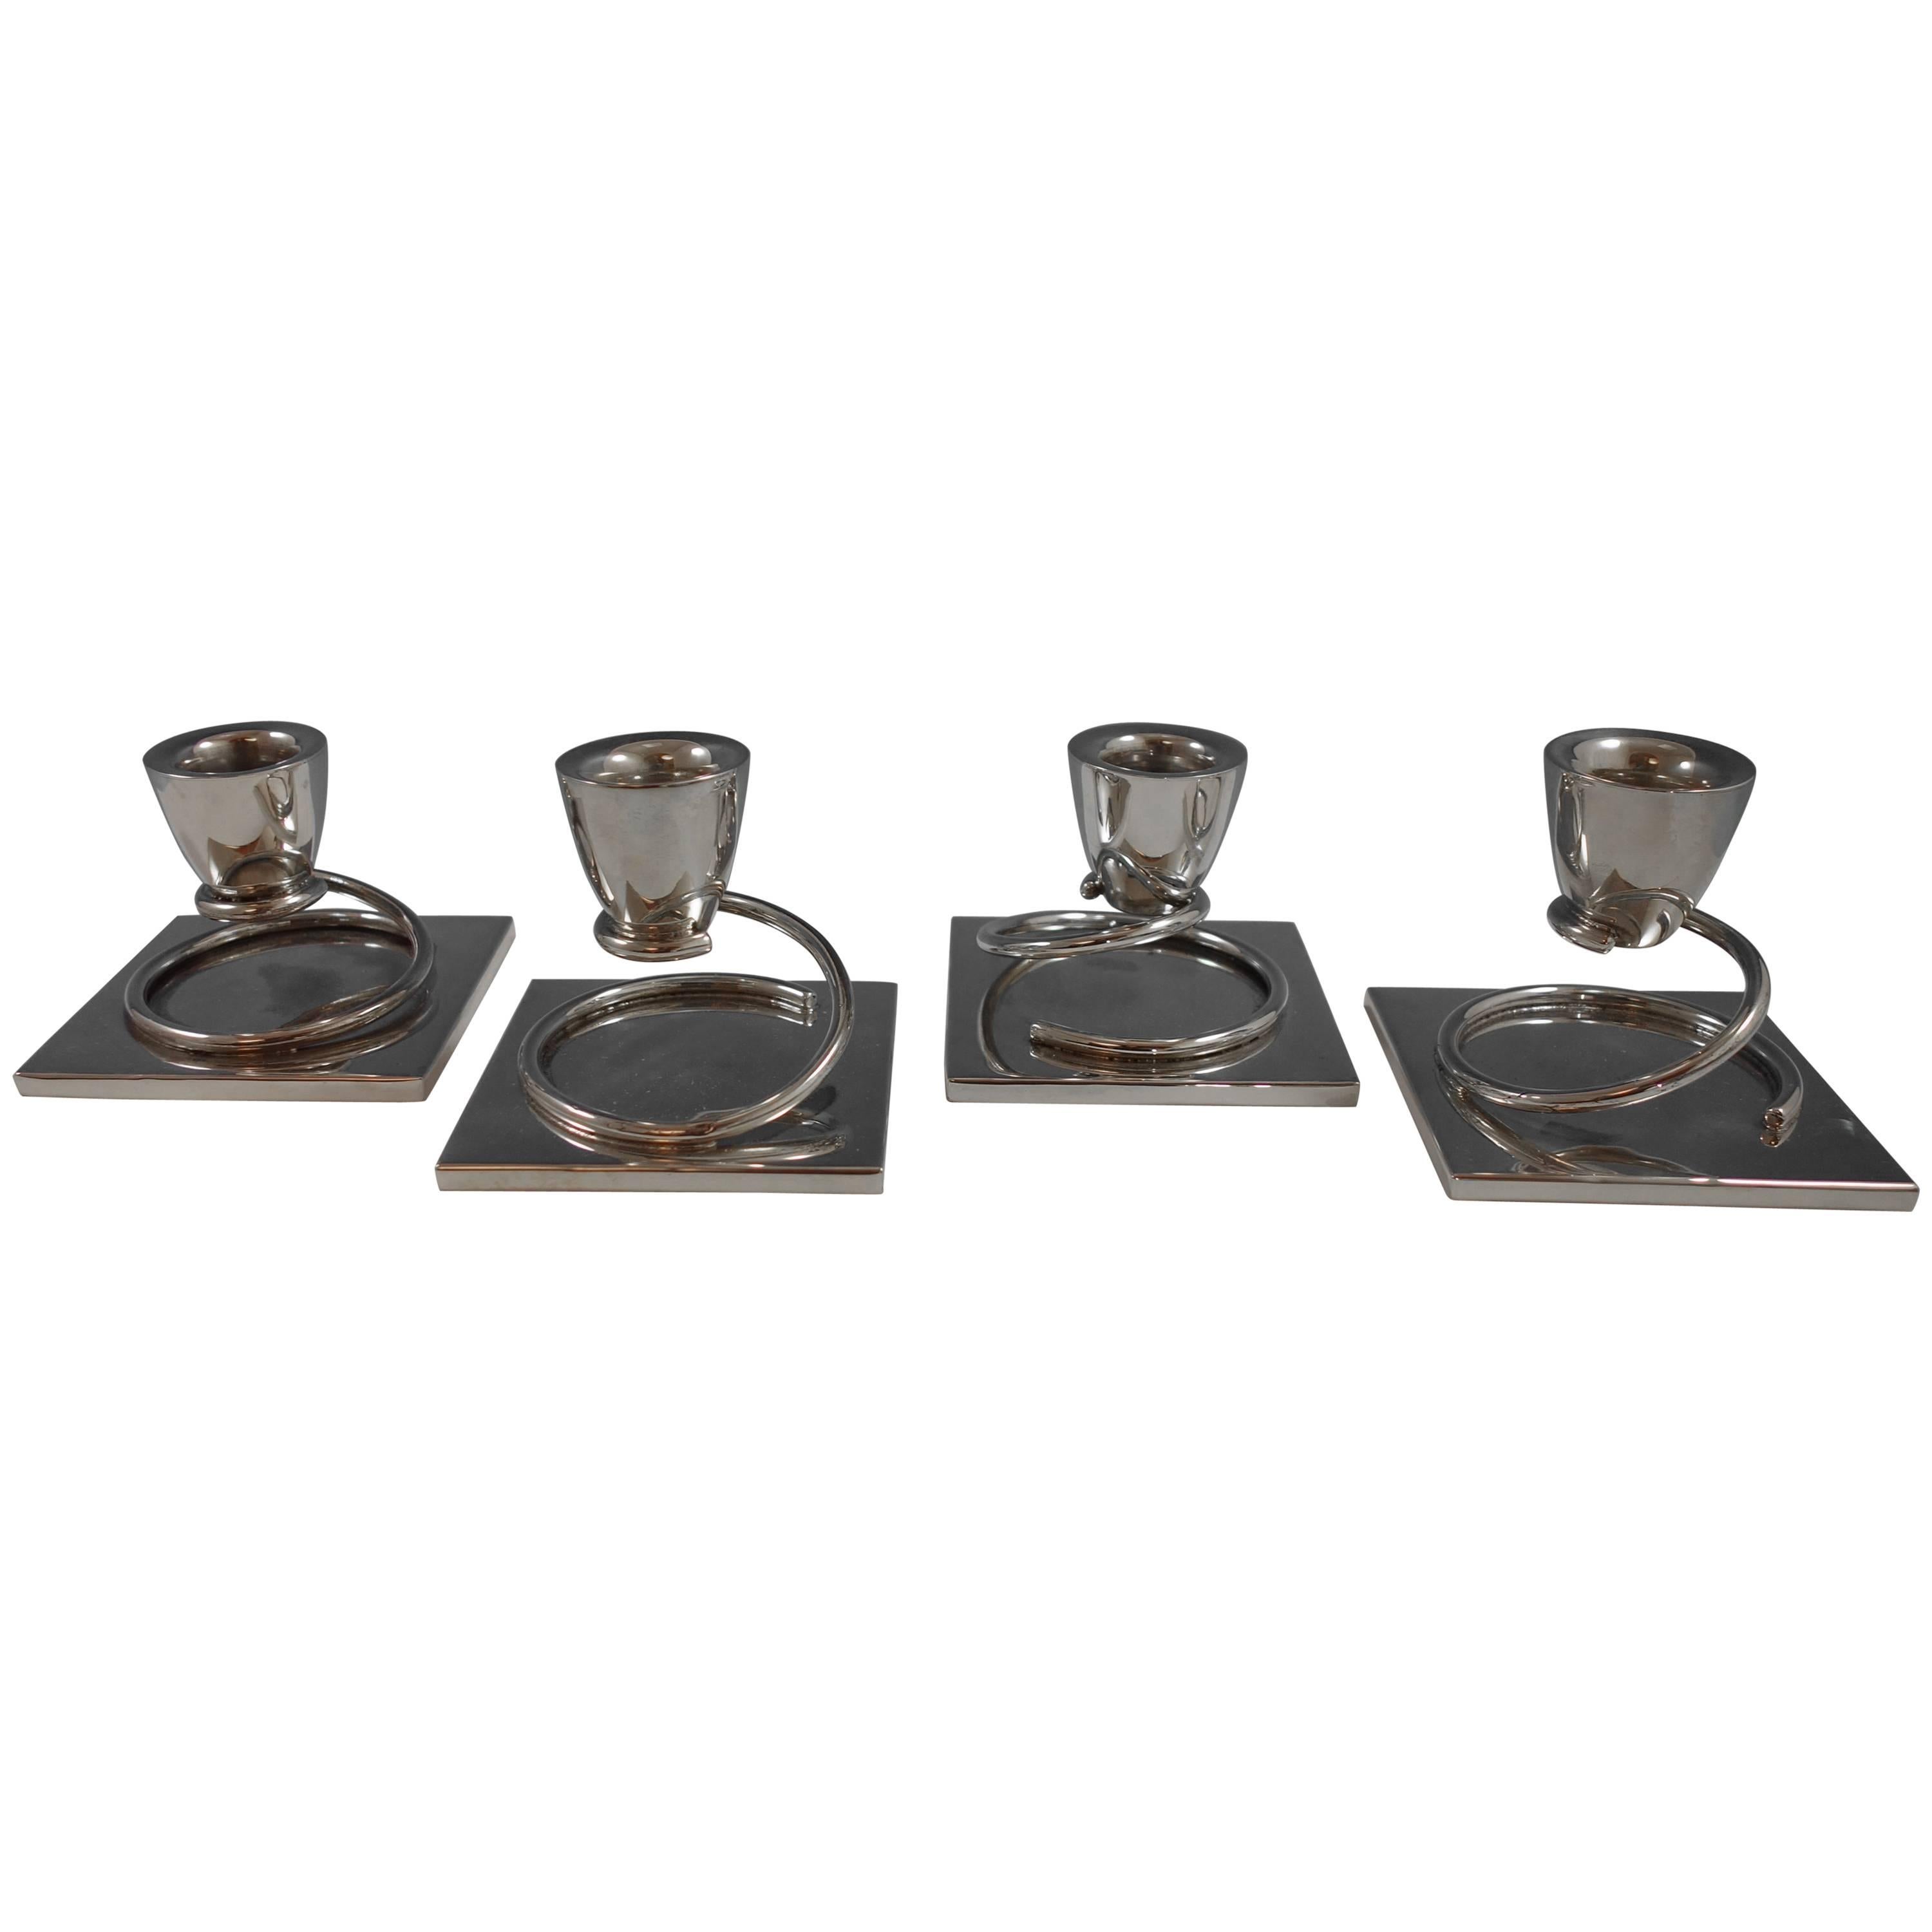 Taxco MV Mexican Mexico Sterling Silver Candleholders Set of Four Pieces, 1970